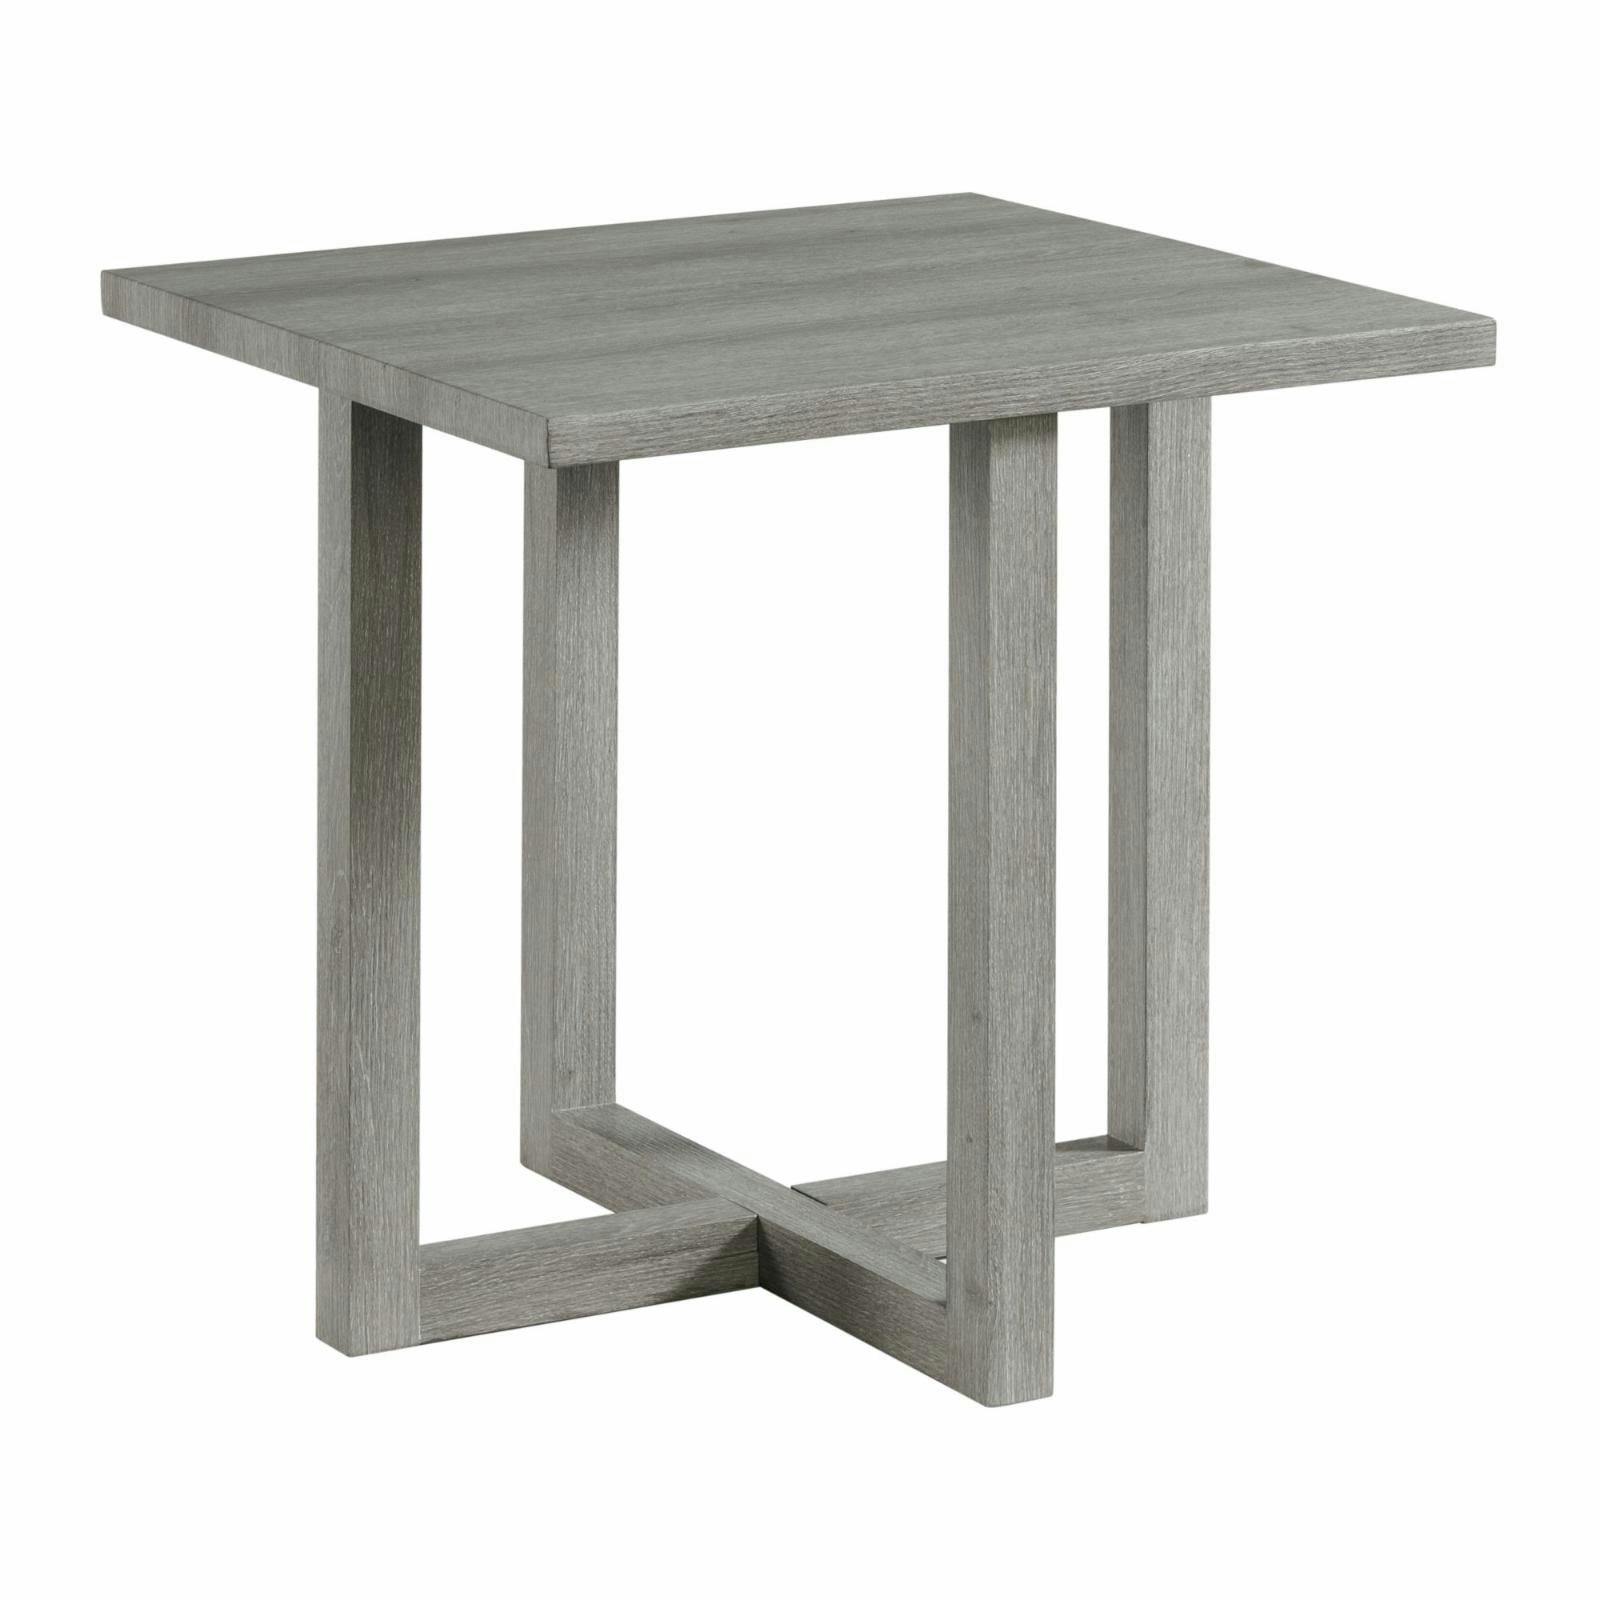 Transitional Dawson Square End Table in Weathered Gray Wood